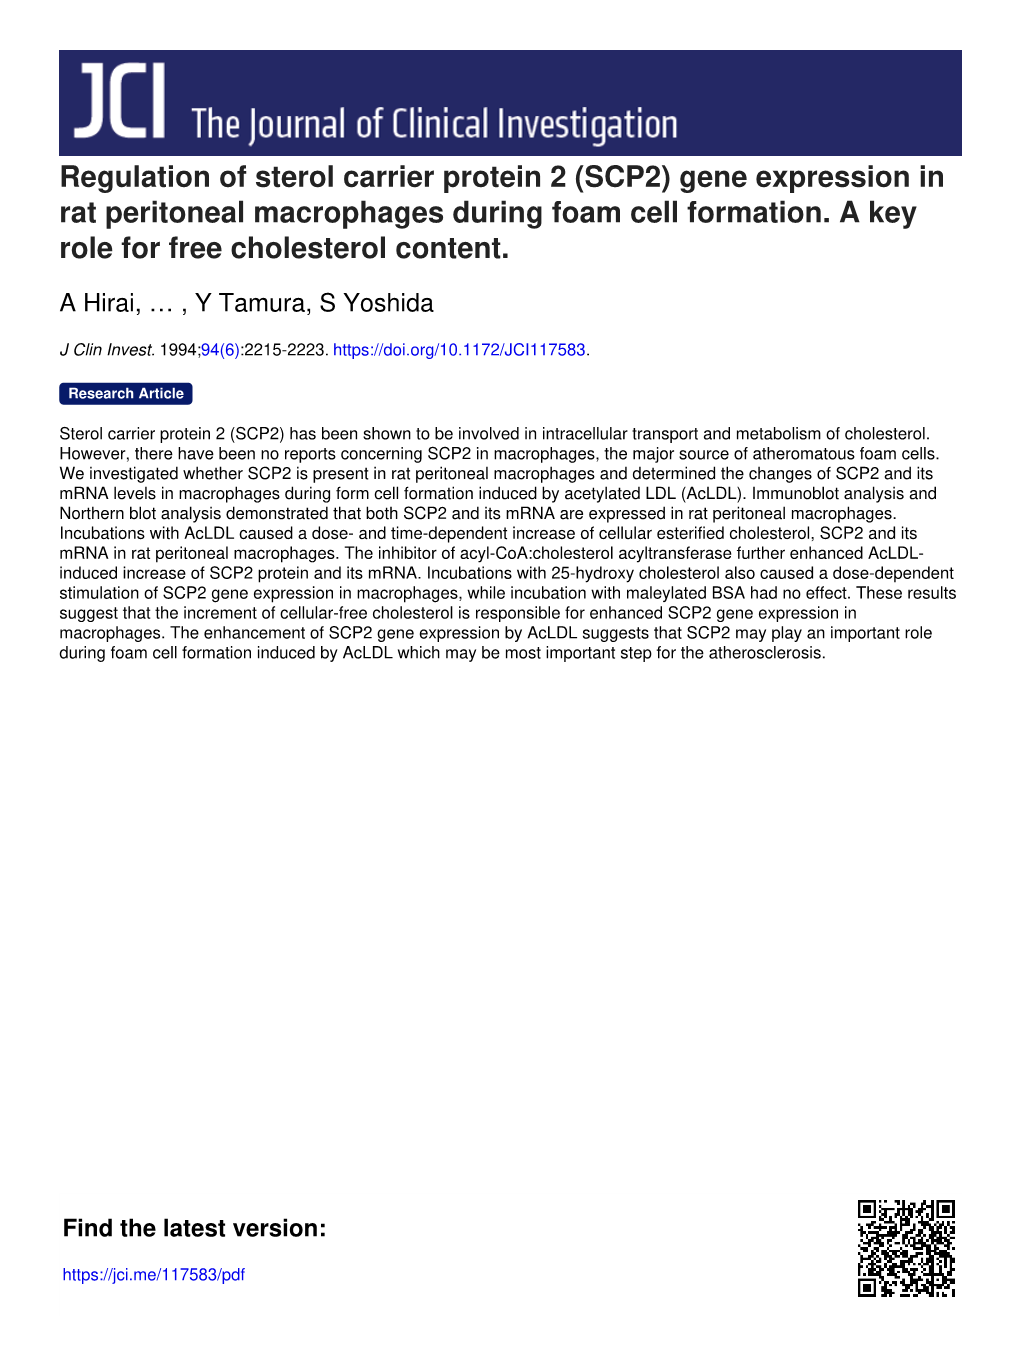 Regulation of Sterol Carrier Protein 2 (SCP2) Gene Expression in Rat Peritoneal Macrophages During Foam Cell Formation